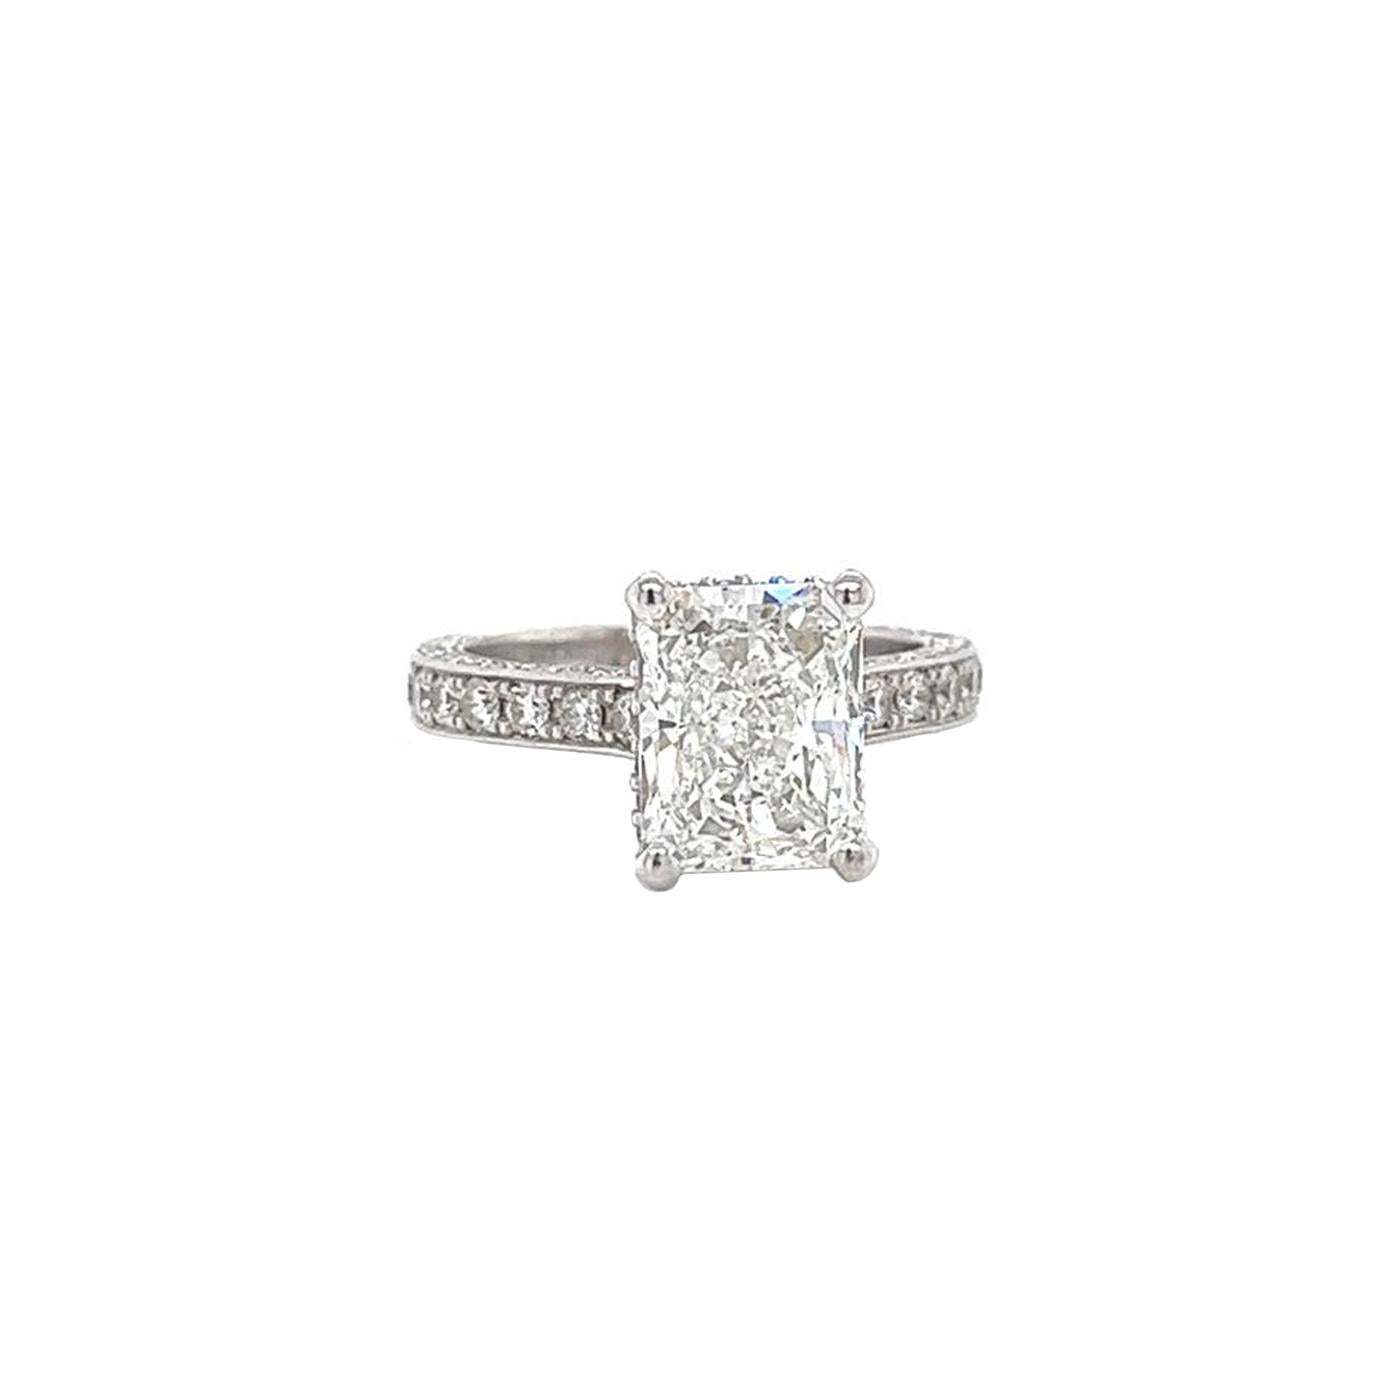 This Beautiful Luxury Authentic Diamond Engagement Ring Features a 3.01 Carat Radiant Diamond Cut with Pave Diamonds crafted in 18 18-karat white Gold. It has a Si1 Clarity Grade with G Color, is GIA certified / Graded, and is Appraised by GIA. This